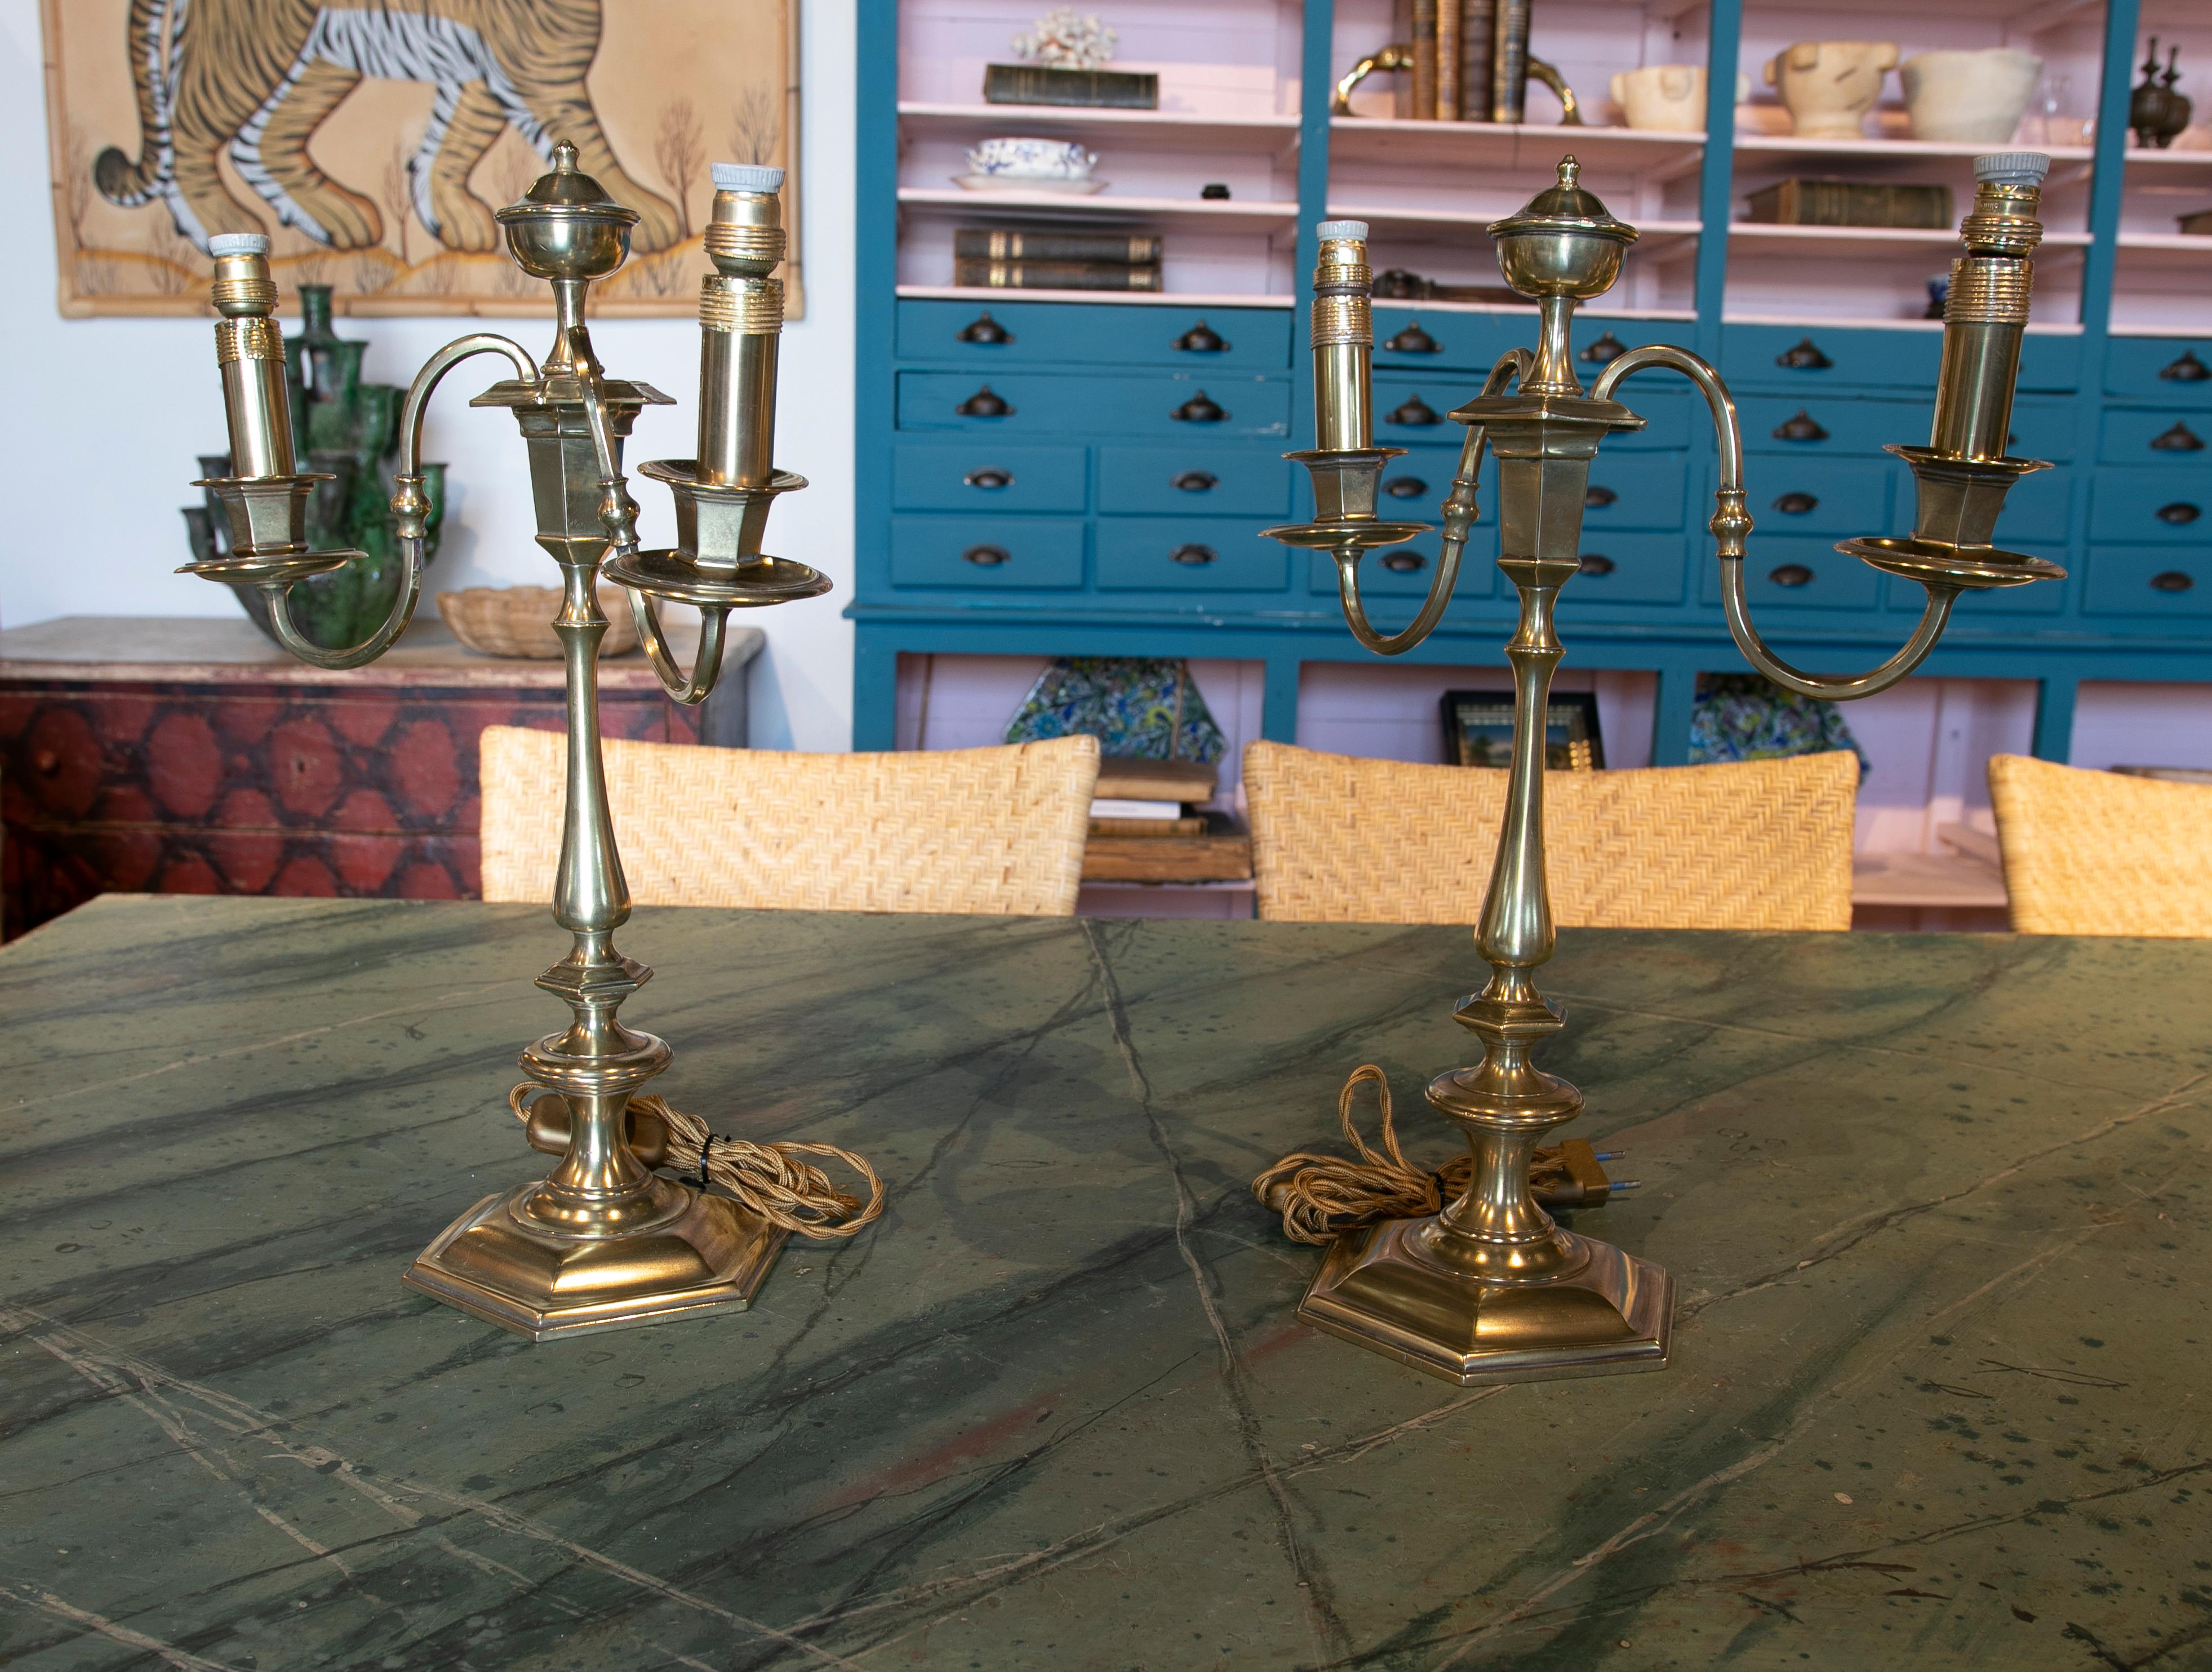 Pair of table lamps made with bronze candlesticks.